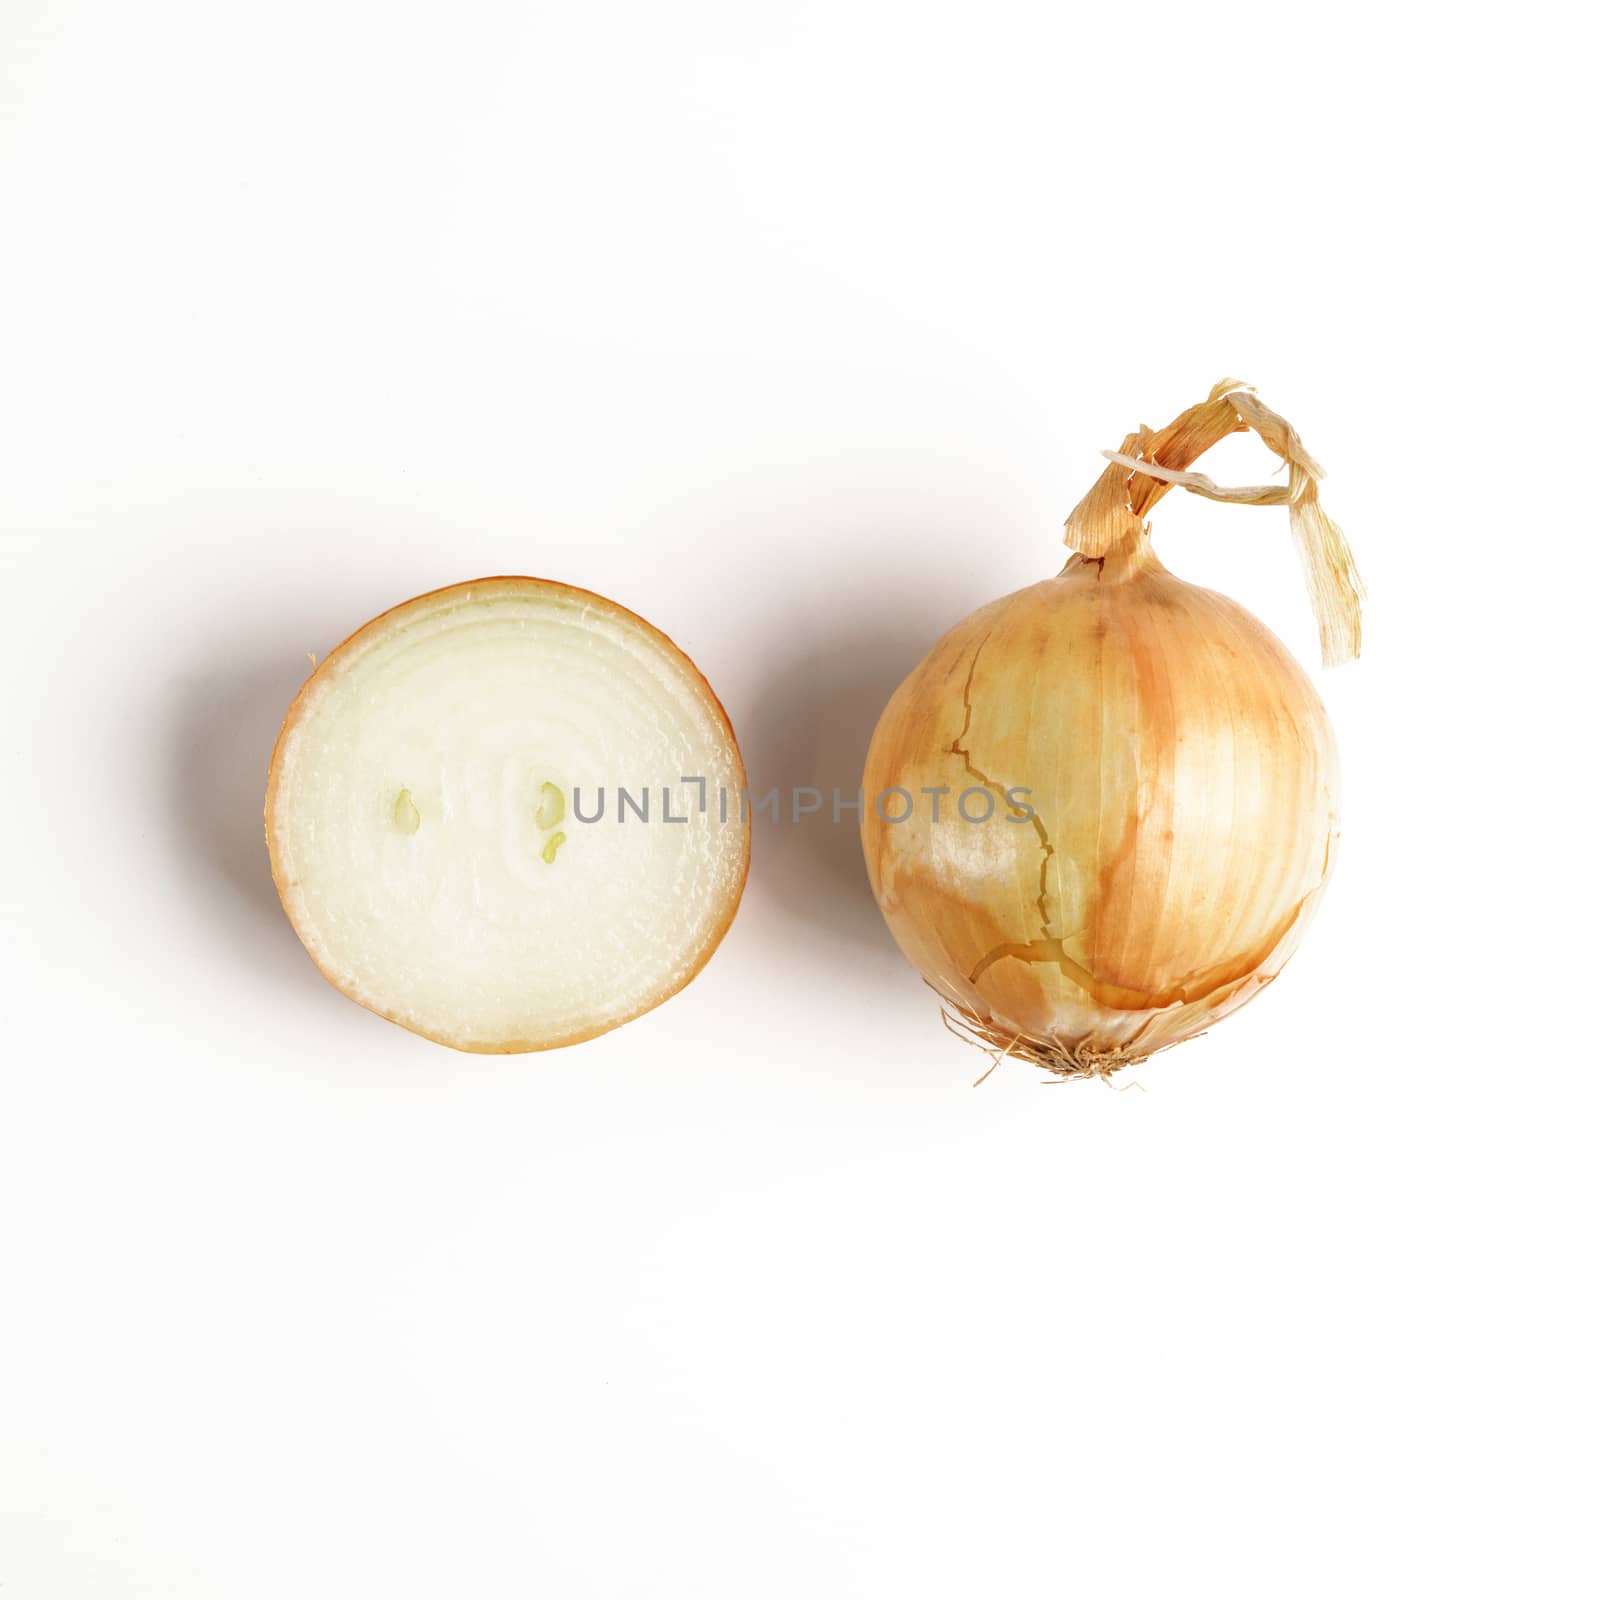 Onion isolated on white by fascinadora